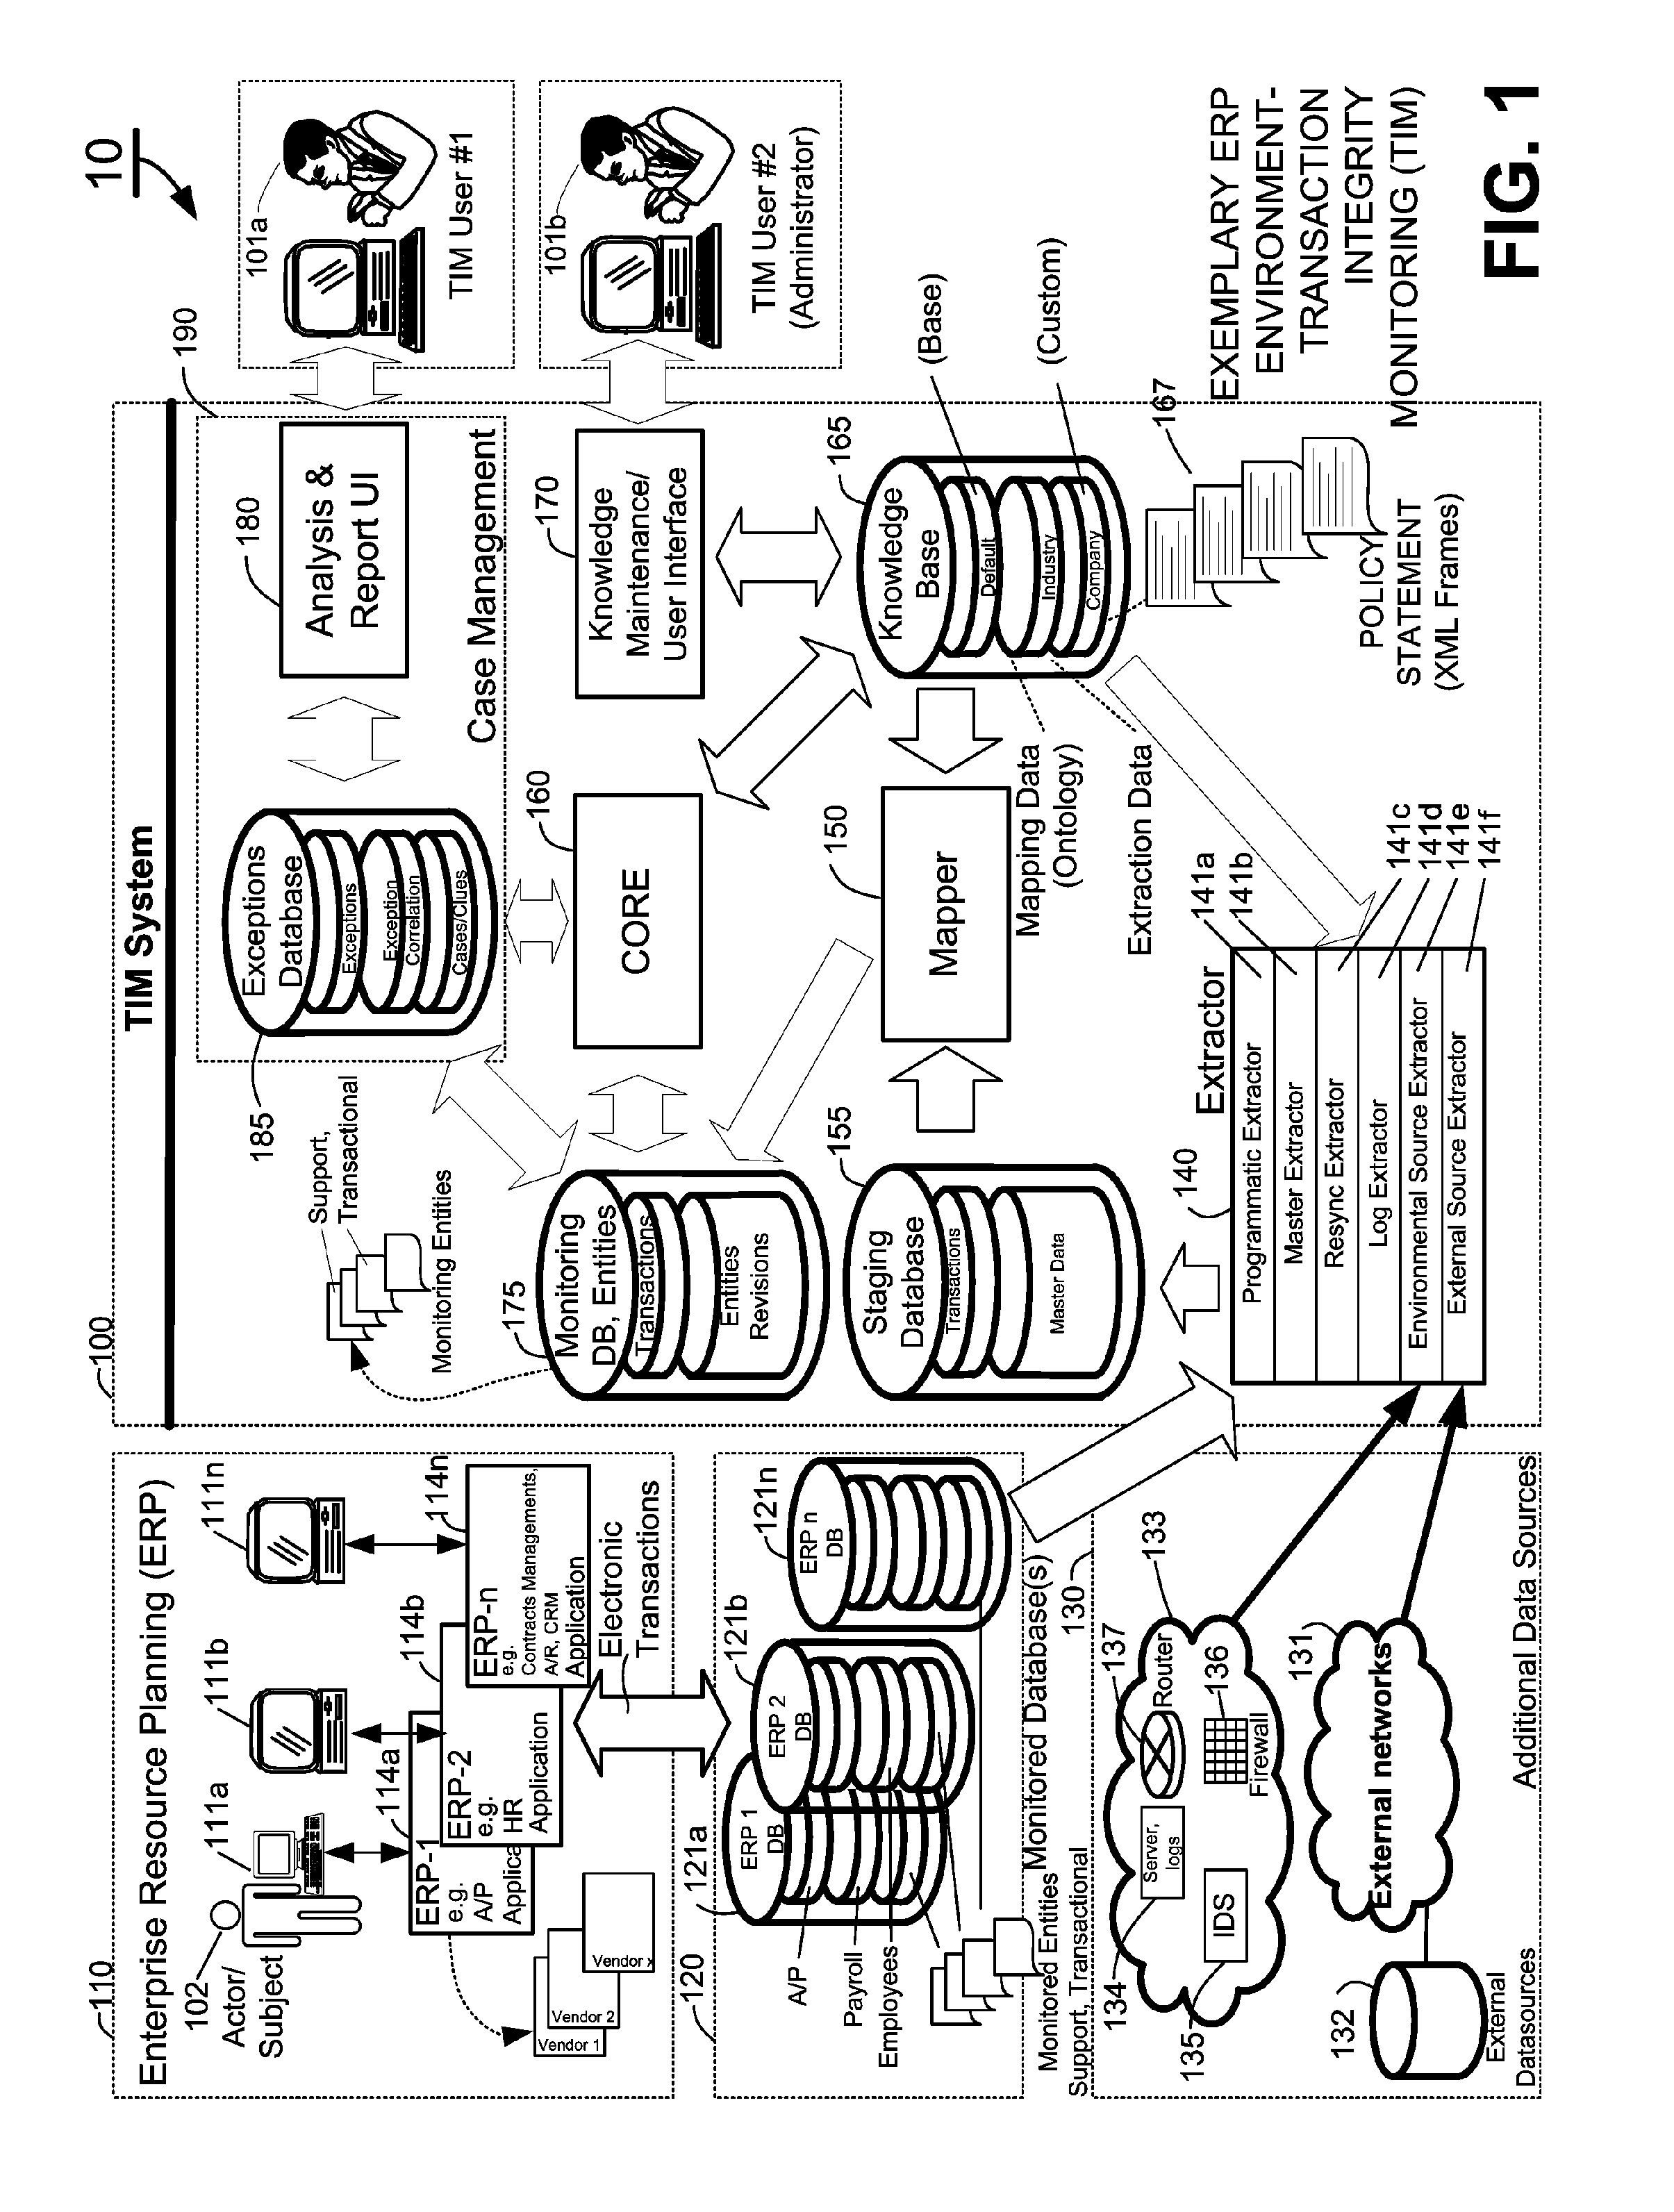 Methods and systems for mapping transaction data to common ontology for compliance monitoring